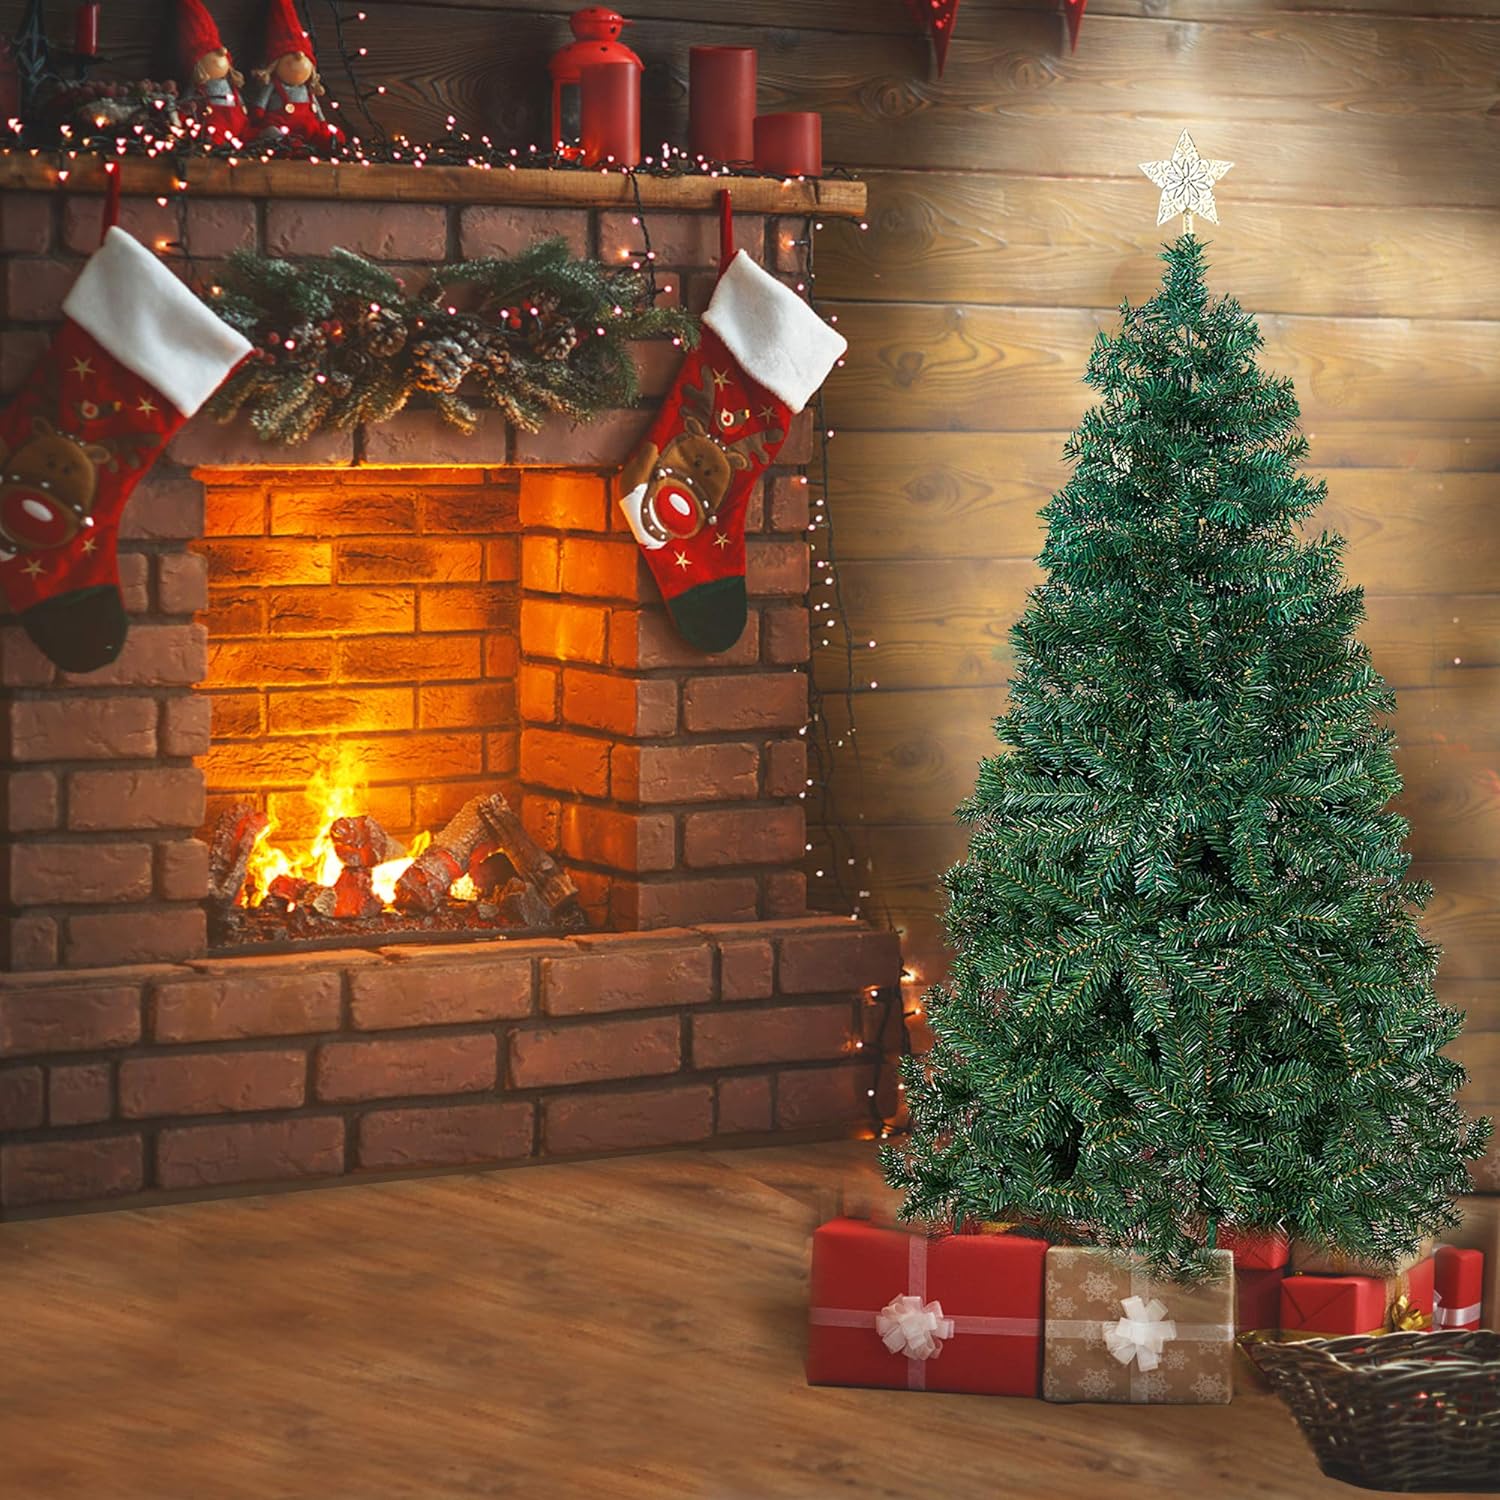 5ft Artificial Christmas Pine Tree Small Xmas Trees with 450 Branch Tips Holiday Decoration